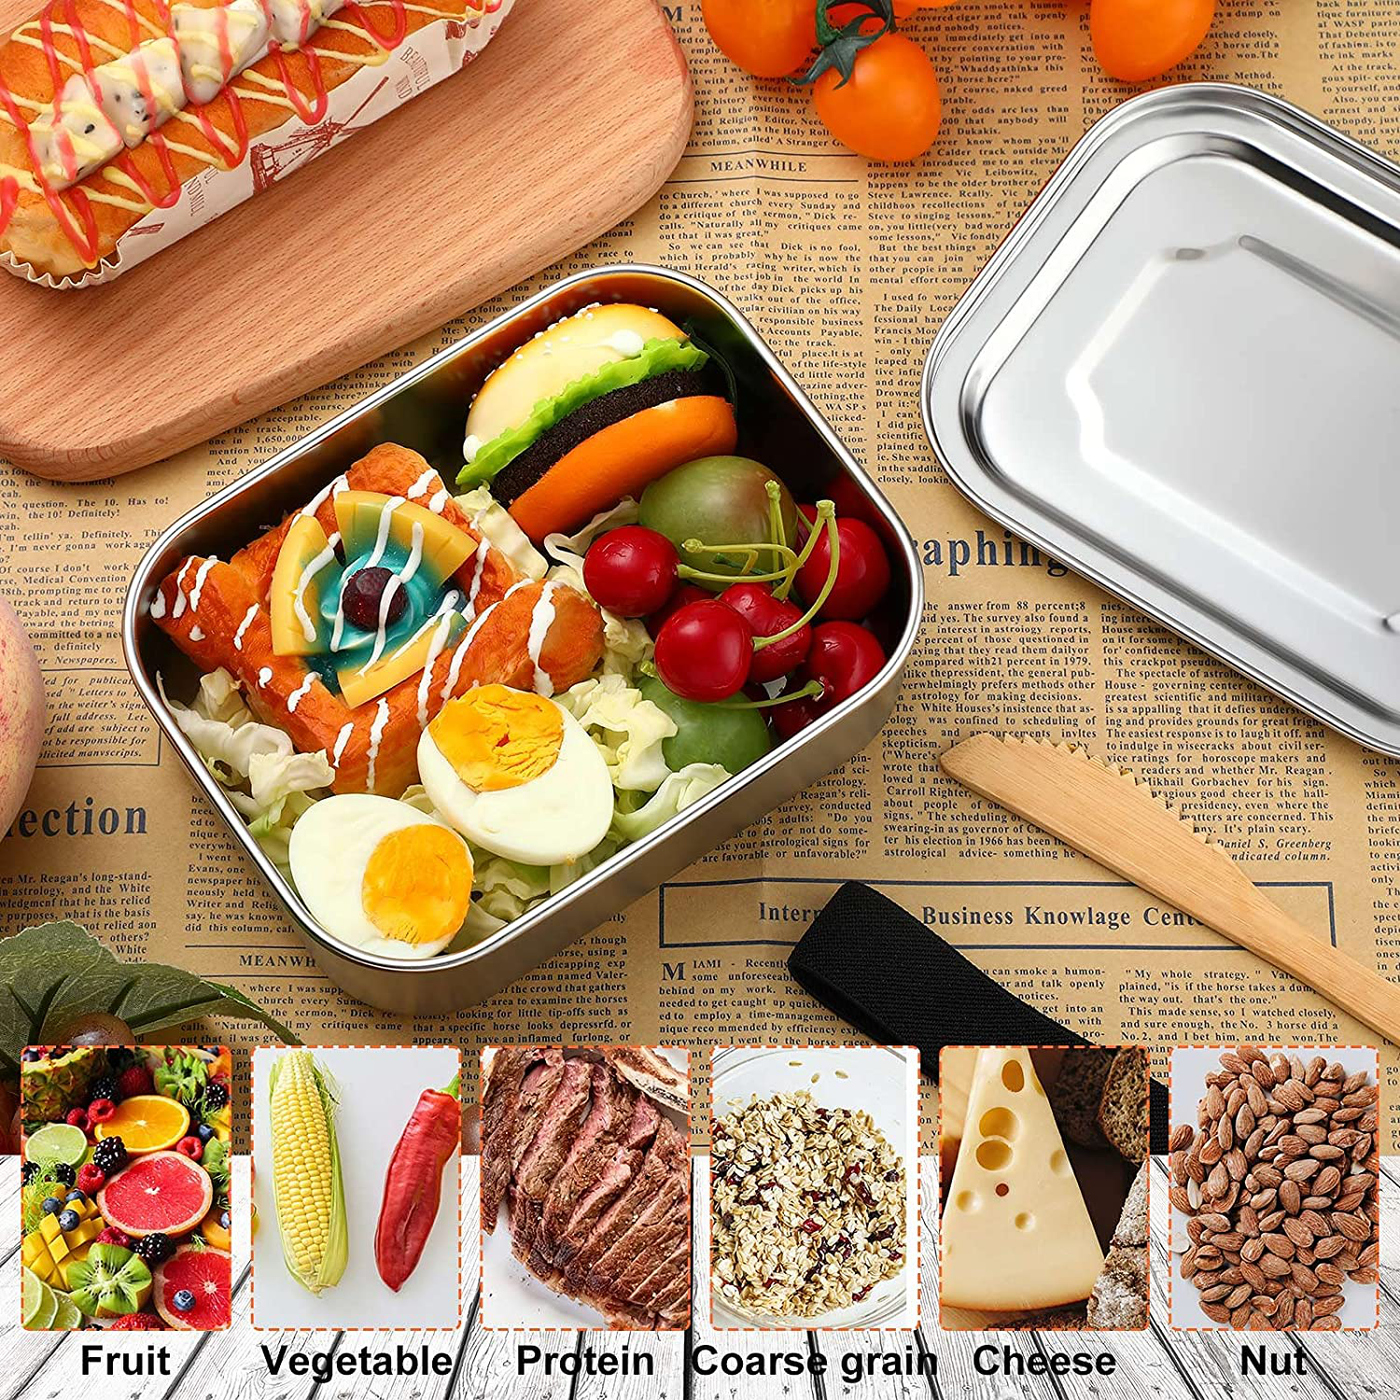 2 Pieces Stainless Steel Bento Box Metal Lunch Box Containers Metal Lunch Containers Metal Snack Food Containers for Kids or Adults Fruit Vegetables Lunch Food Box Container Dishwasher Safe